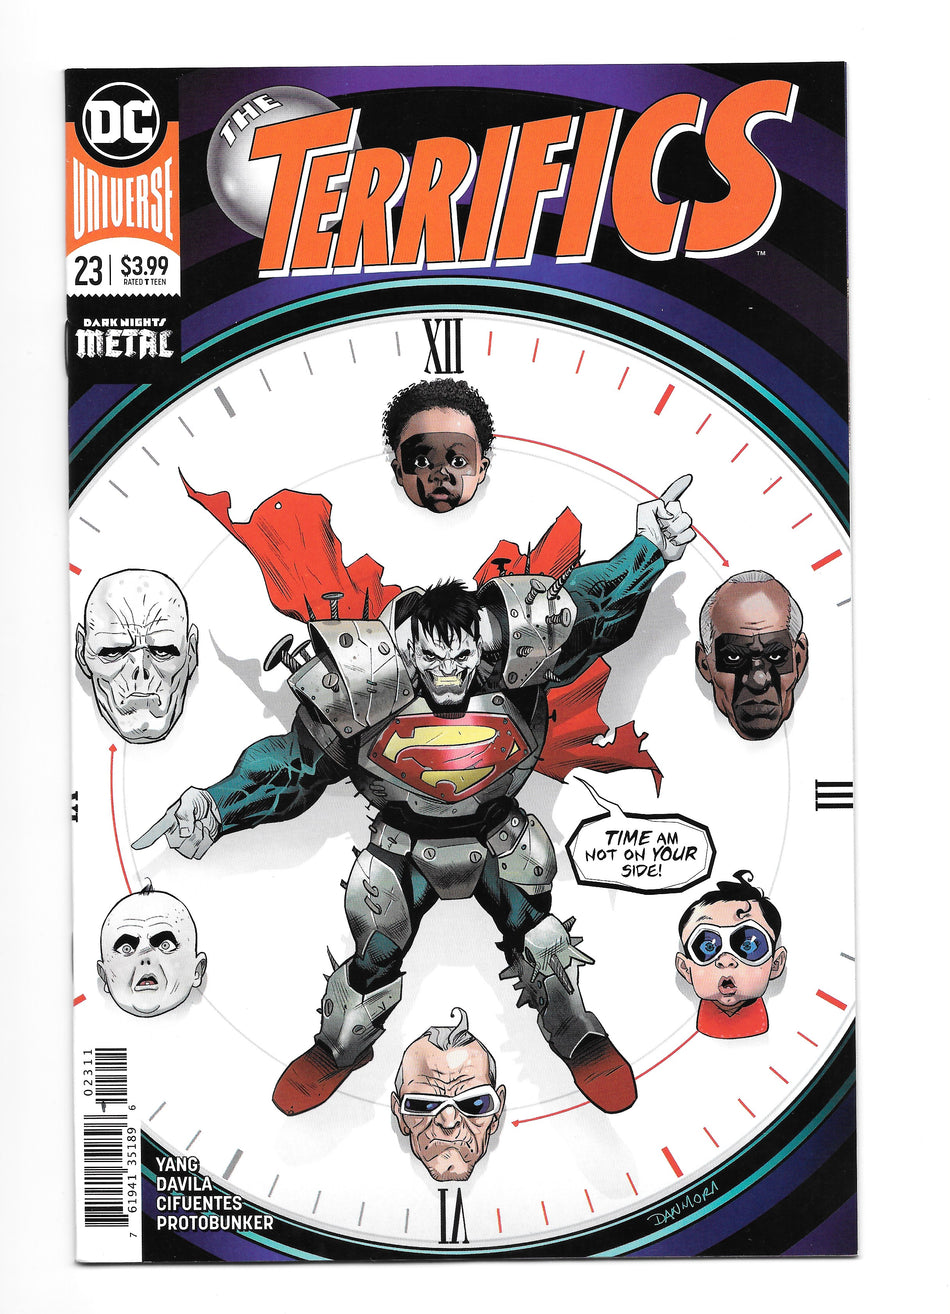 Photo of Terrifics Issue 17 comic sold by Stronghold Collectibles